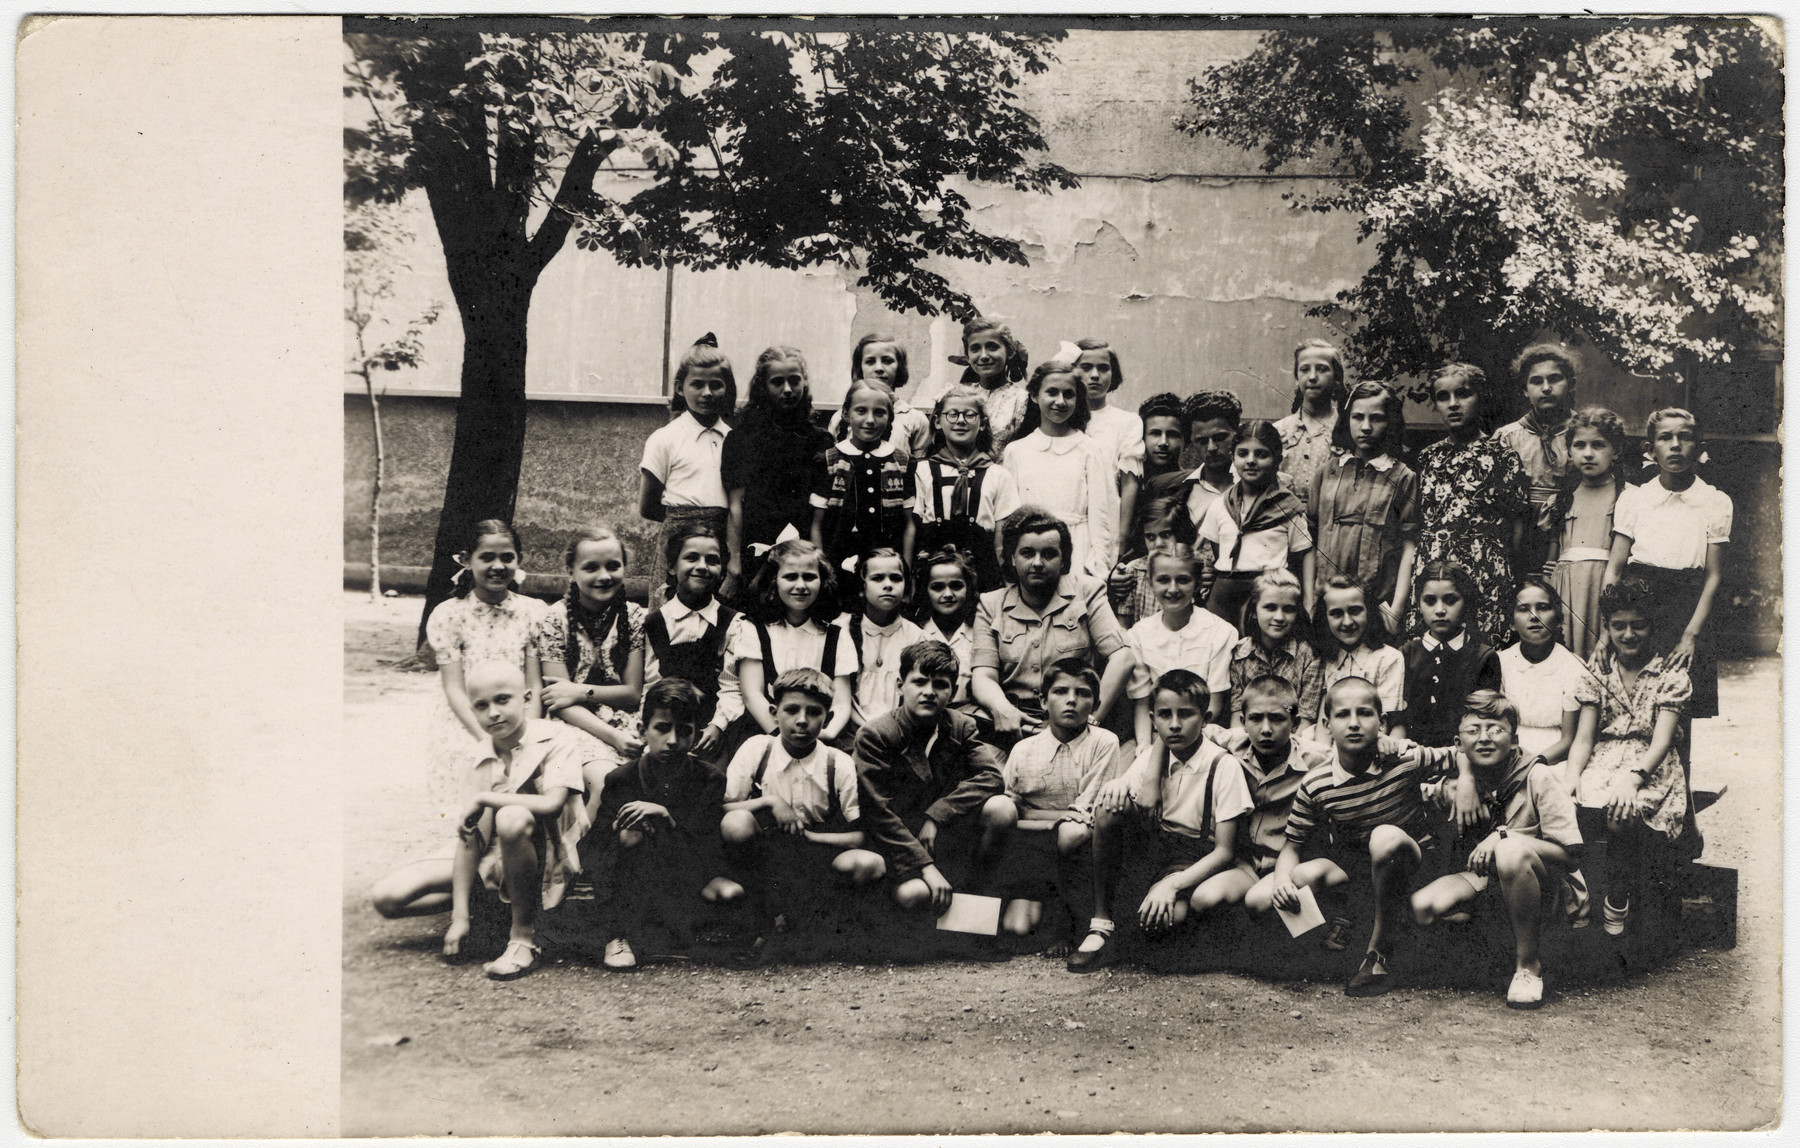 Postwar picture of an elementary school class in Zagreb.  Many of the students are wearing red Pioneer neck scarves.

Among those pictured is Rina Willer, standing third from the right.